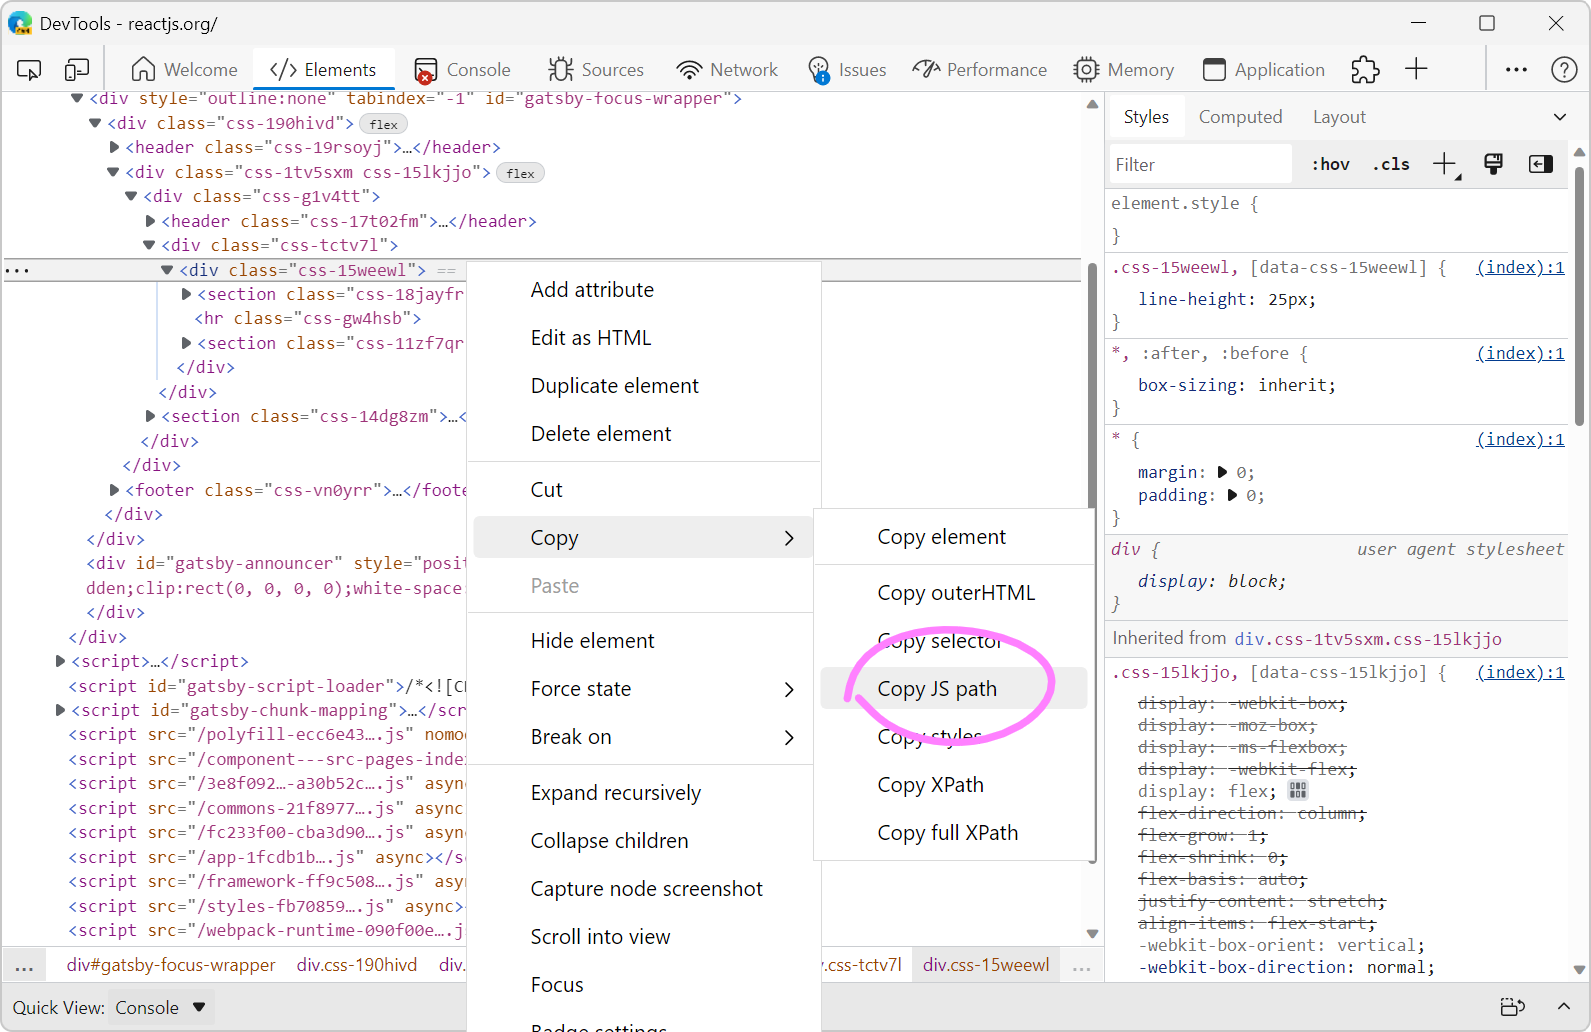 Screenshot of the Elements tool in Edge showing the context menu on an element, with the Copy JS path option